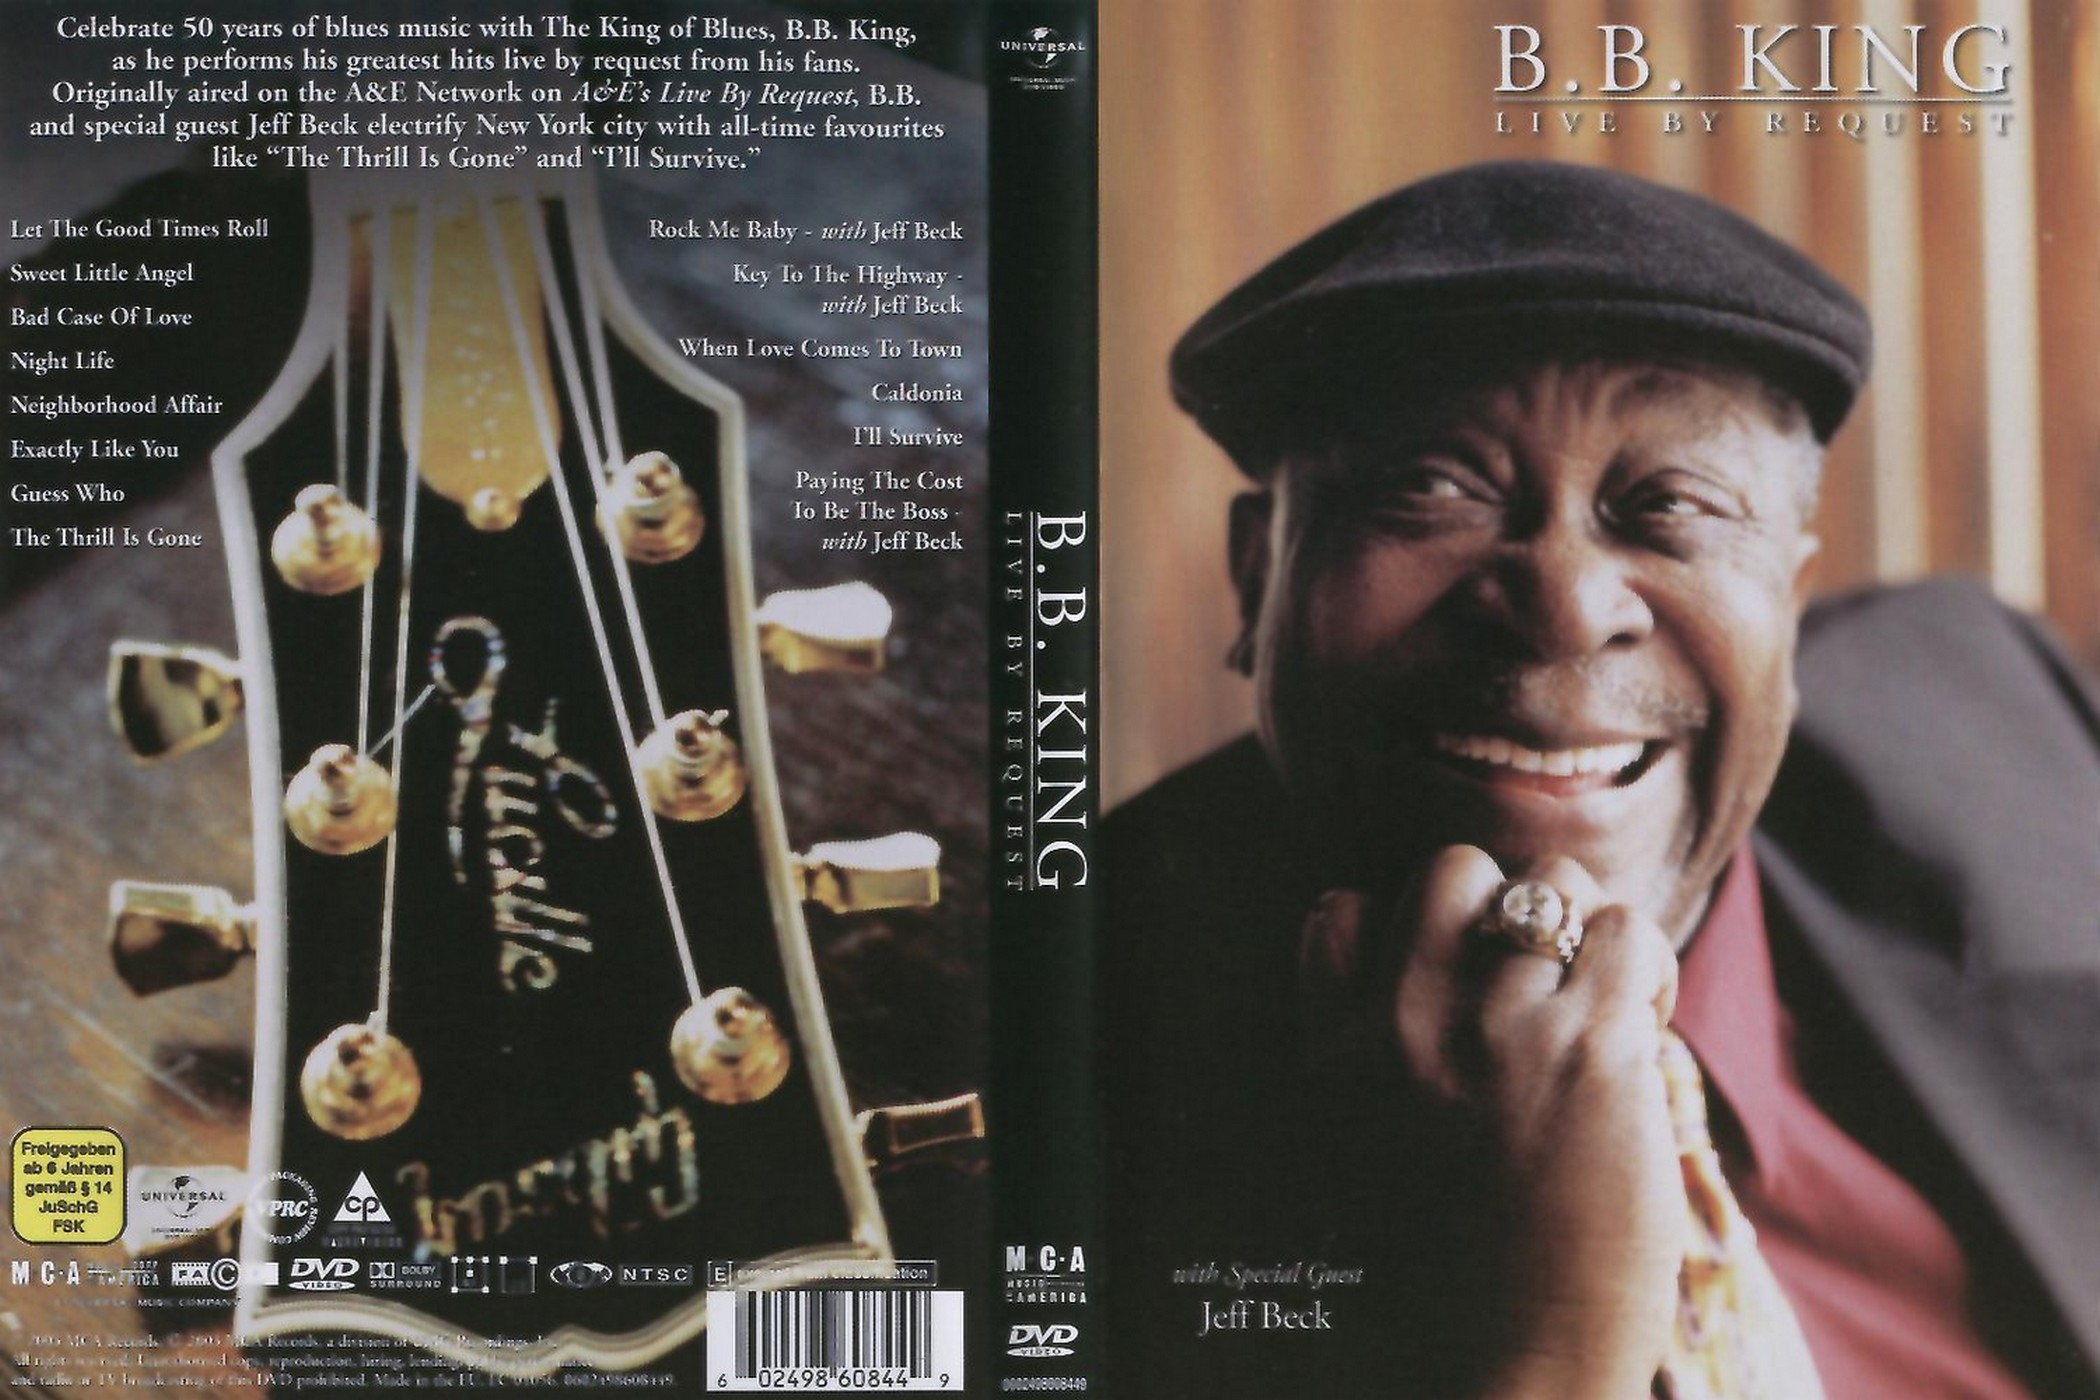 Jaquette DVD B.B king - Live by Request